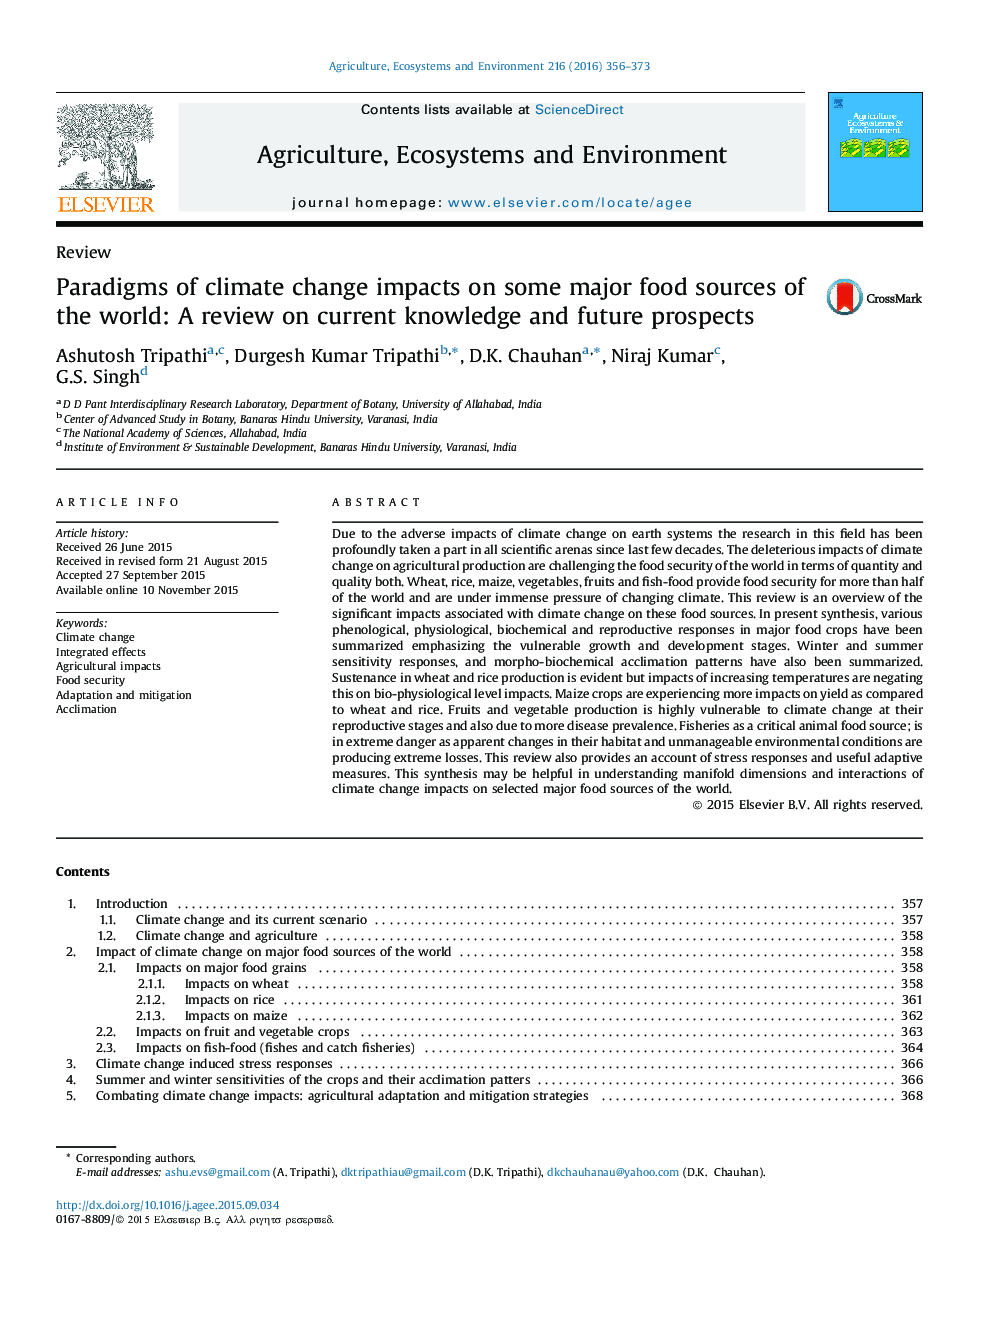 Paradigms of climate change impacts on some major food sources of the world: A review on current knowledge and future prospects